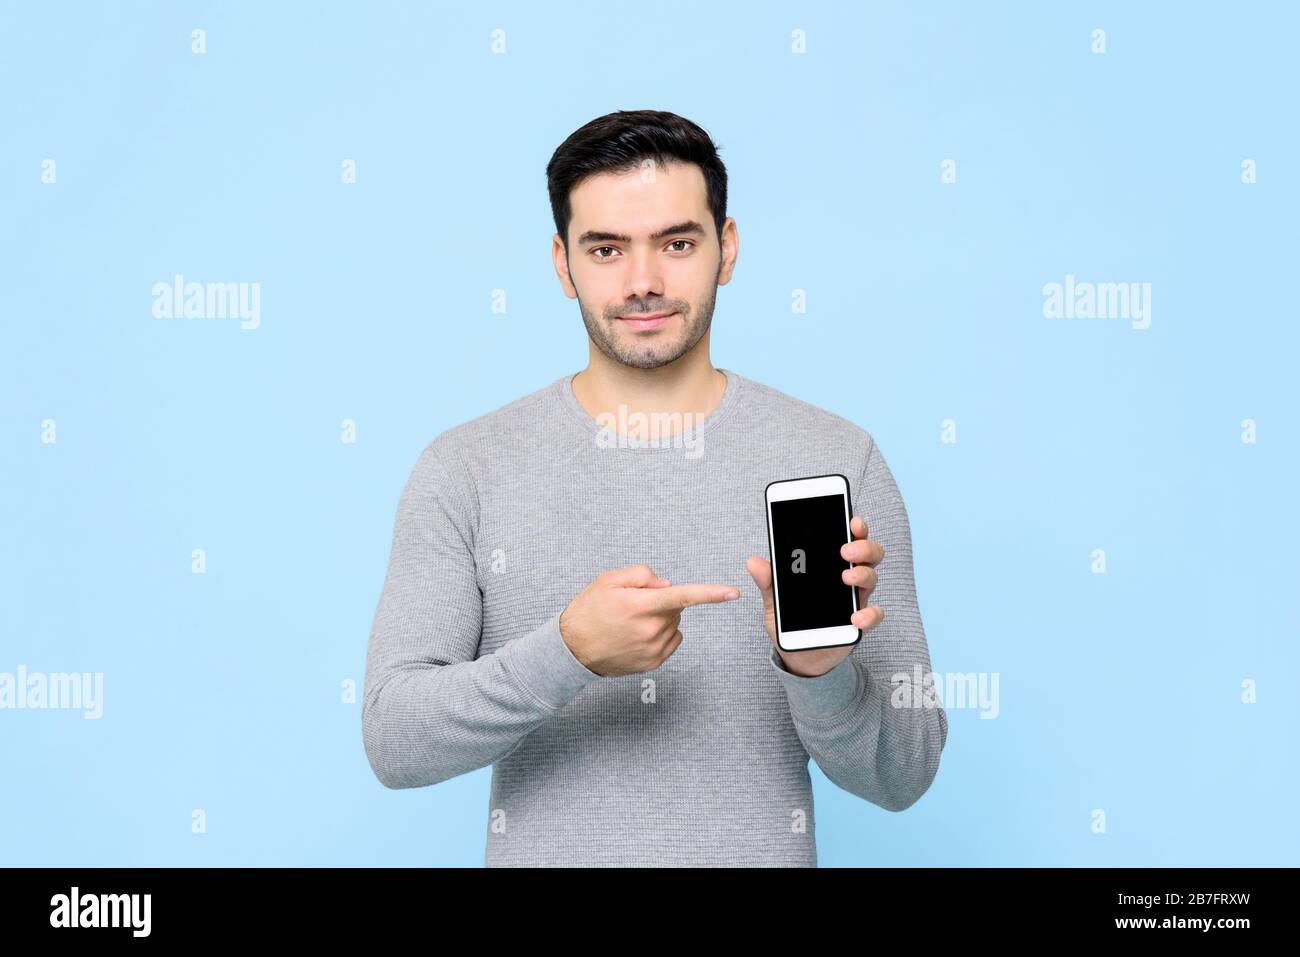 Young handsome man pointing to his mobile phone in hand isolated on light blue background Stock Photo